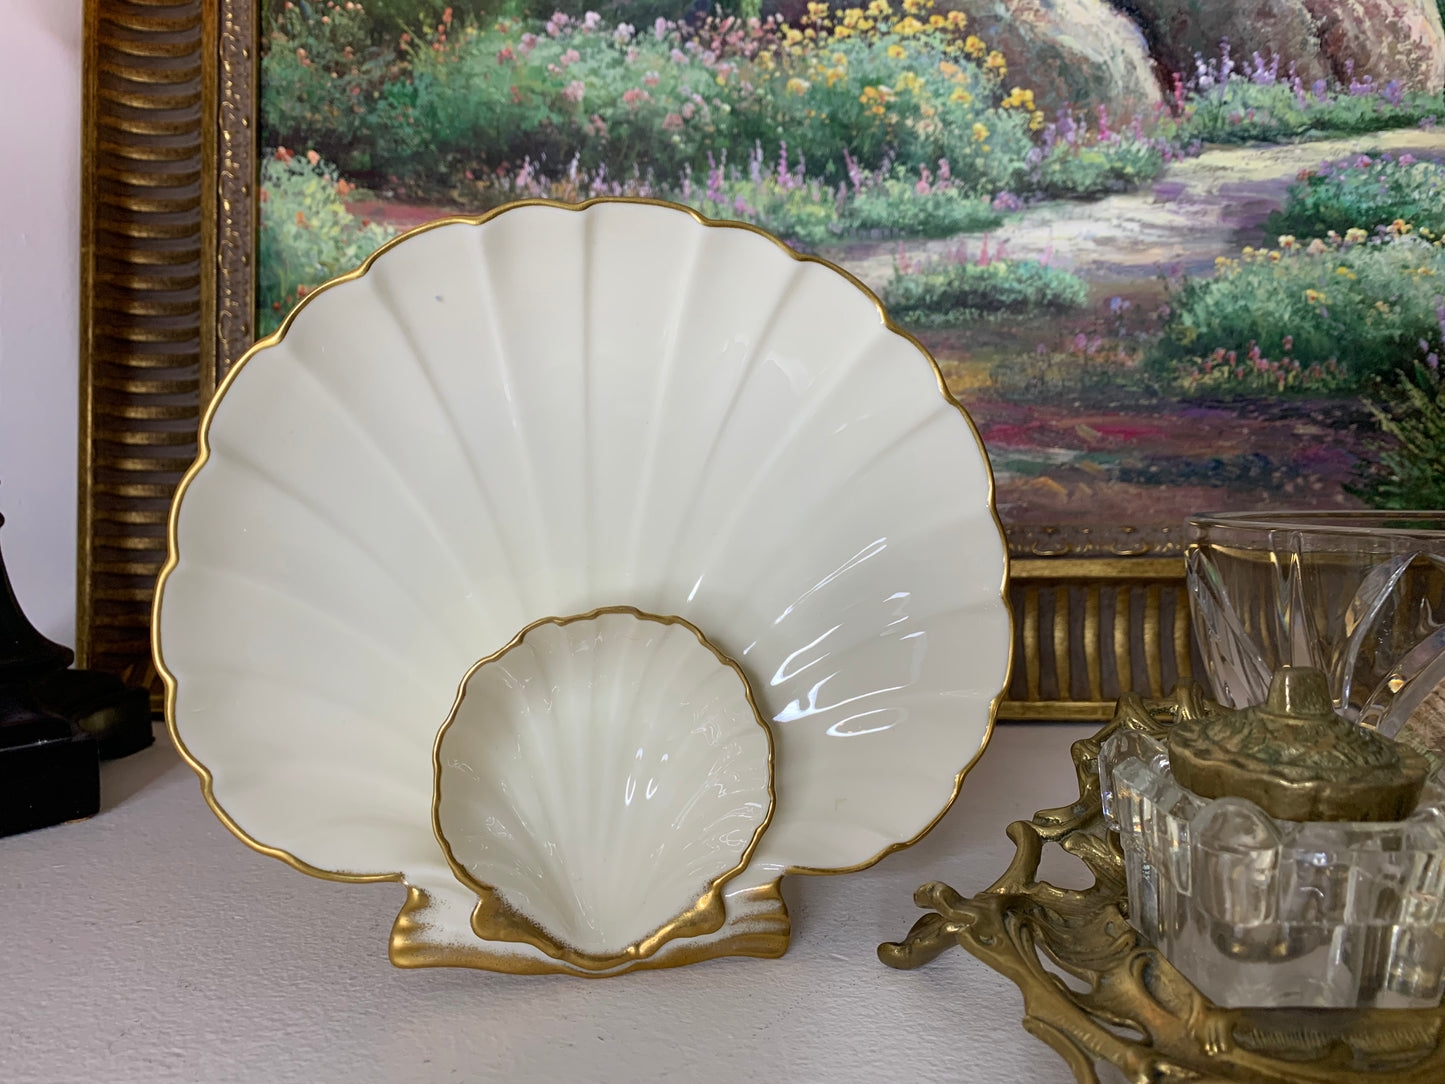 Lovely Lenox Aegean Shell dip tray with 24k gold - Excellent condition!